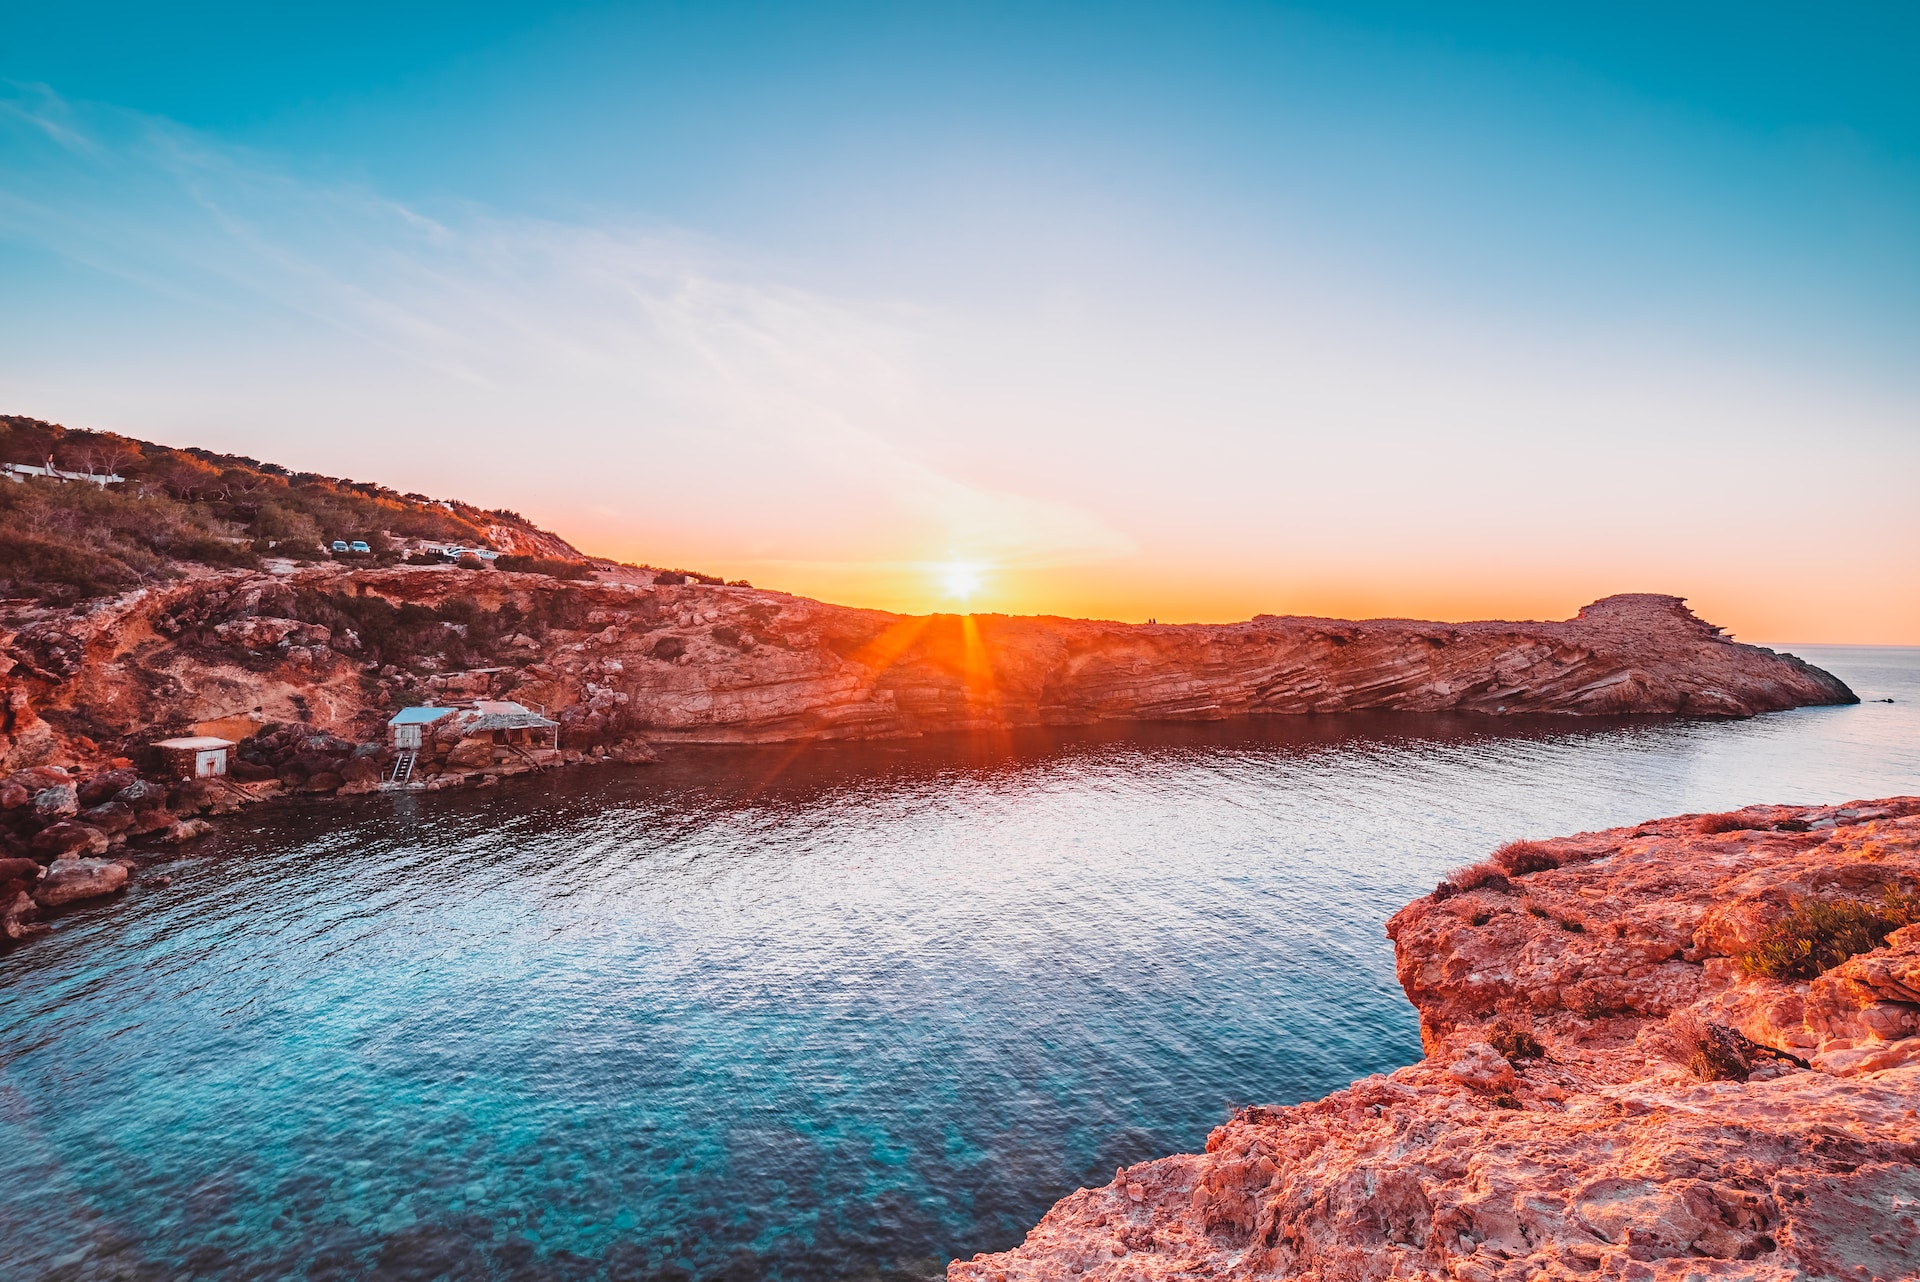 Ibiza cove with red rocky coast at sunset